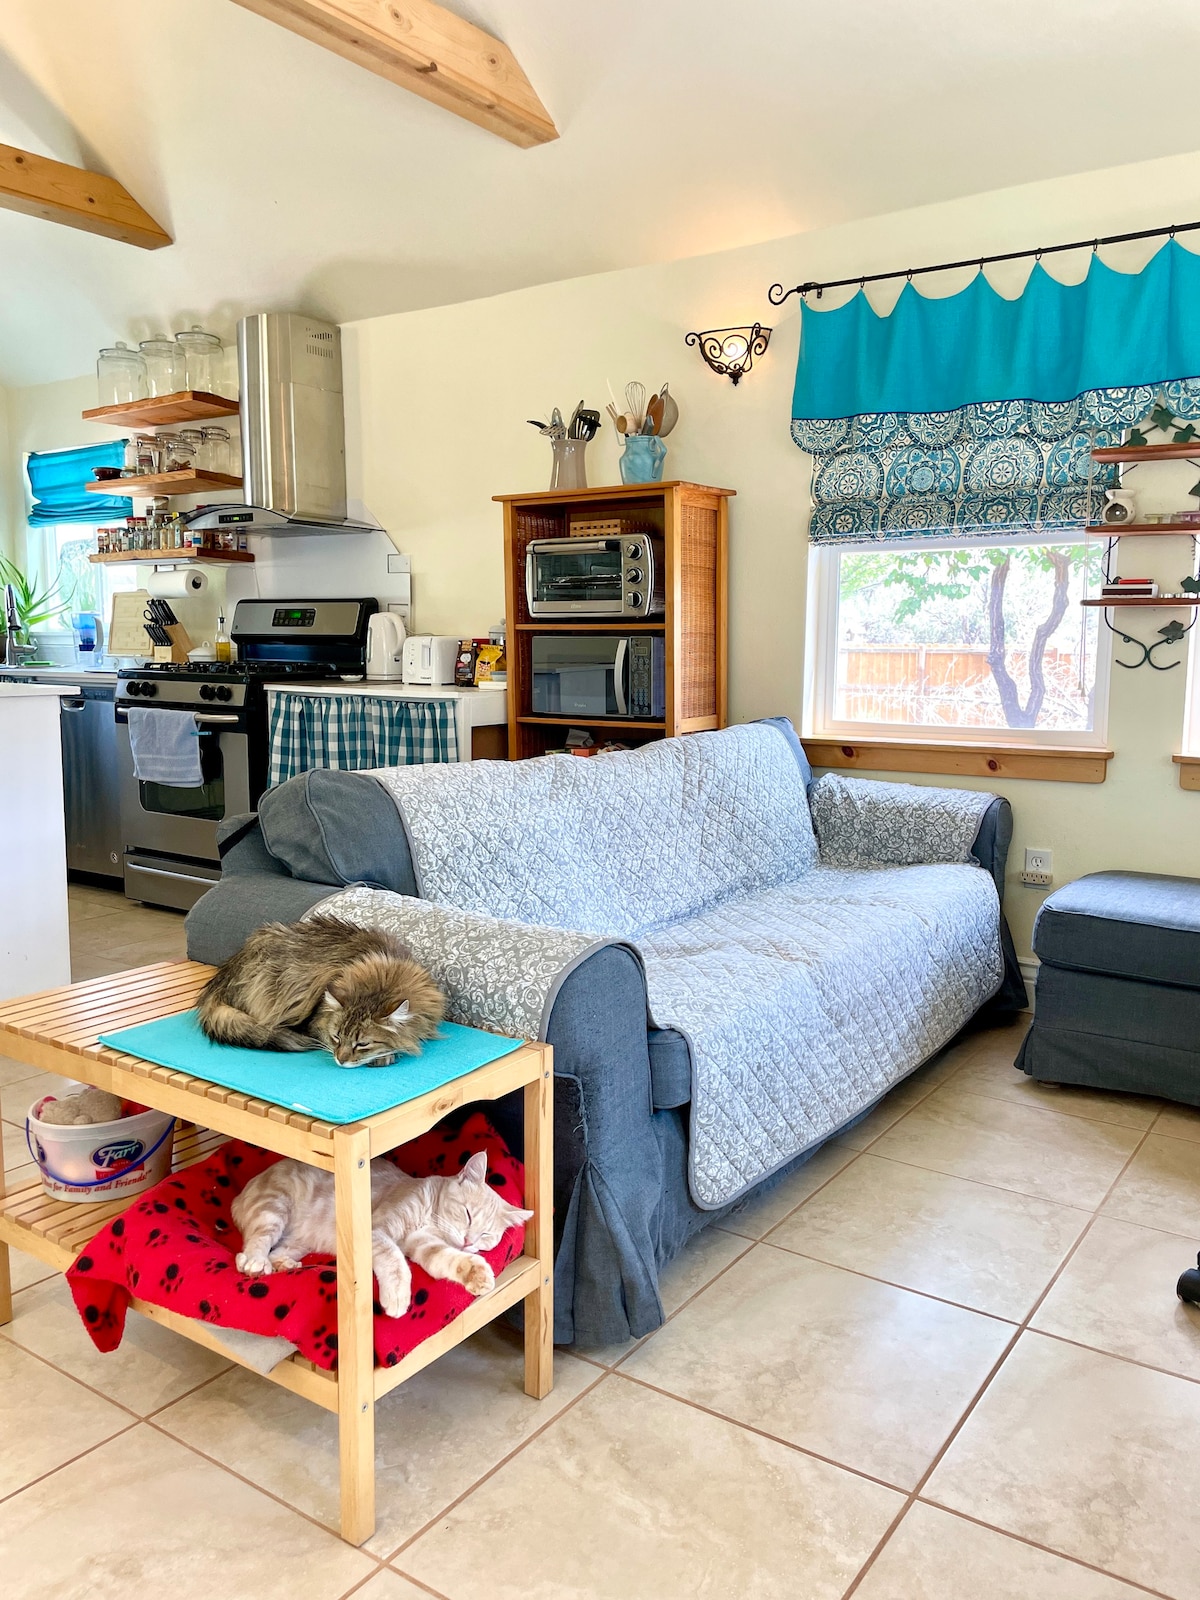 Kitty Cottage: Quiet Oasis, Fast Wi-fi, Peaceful